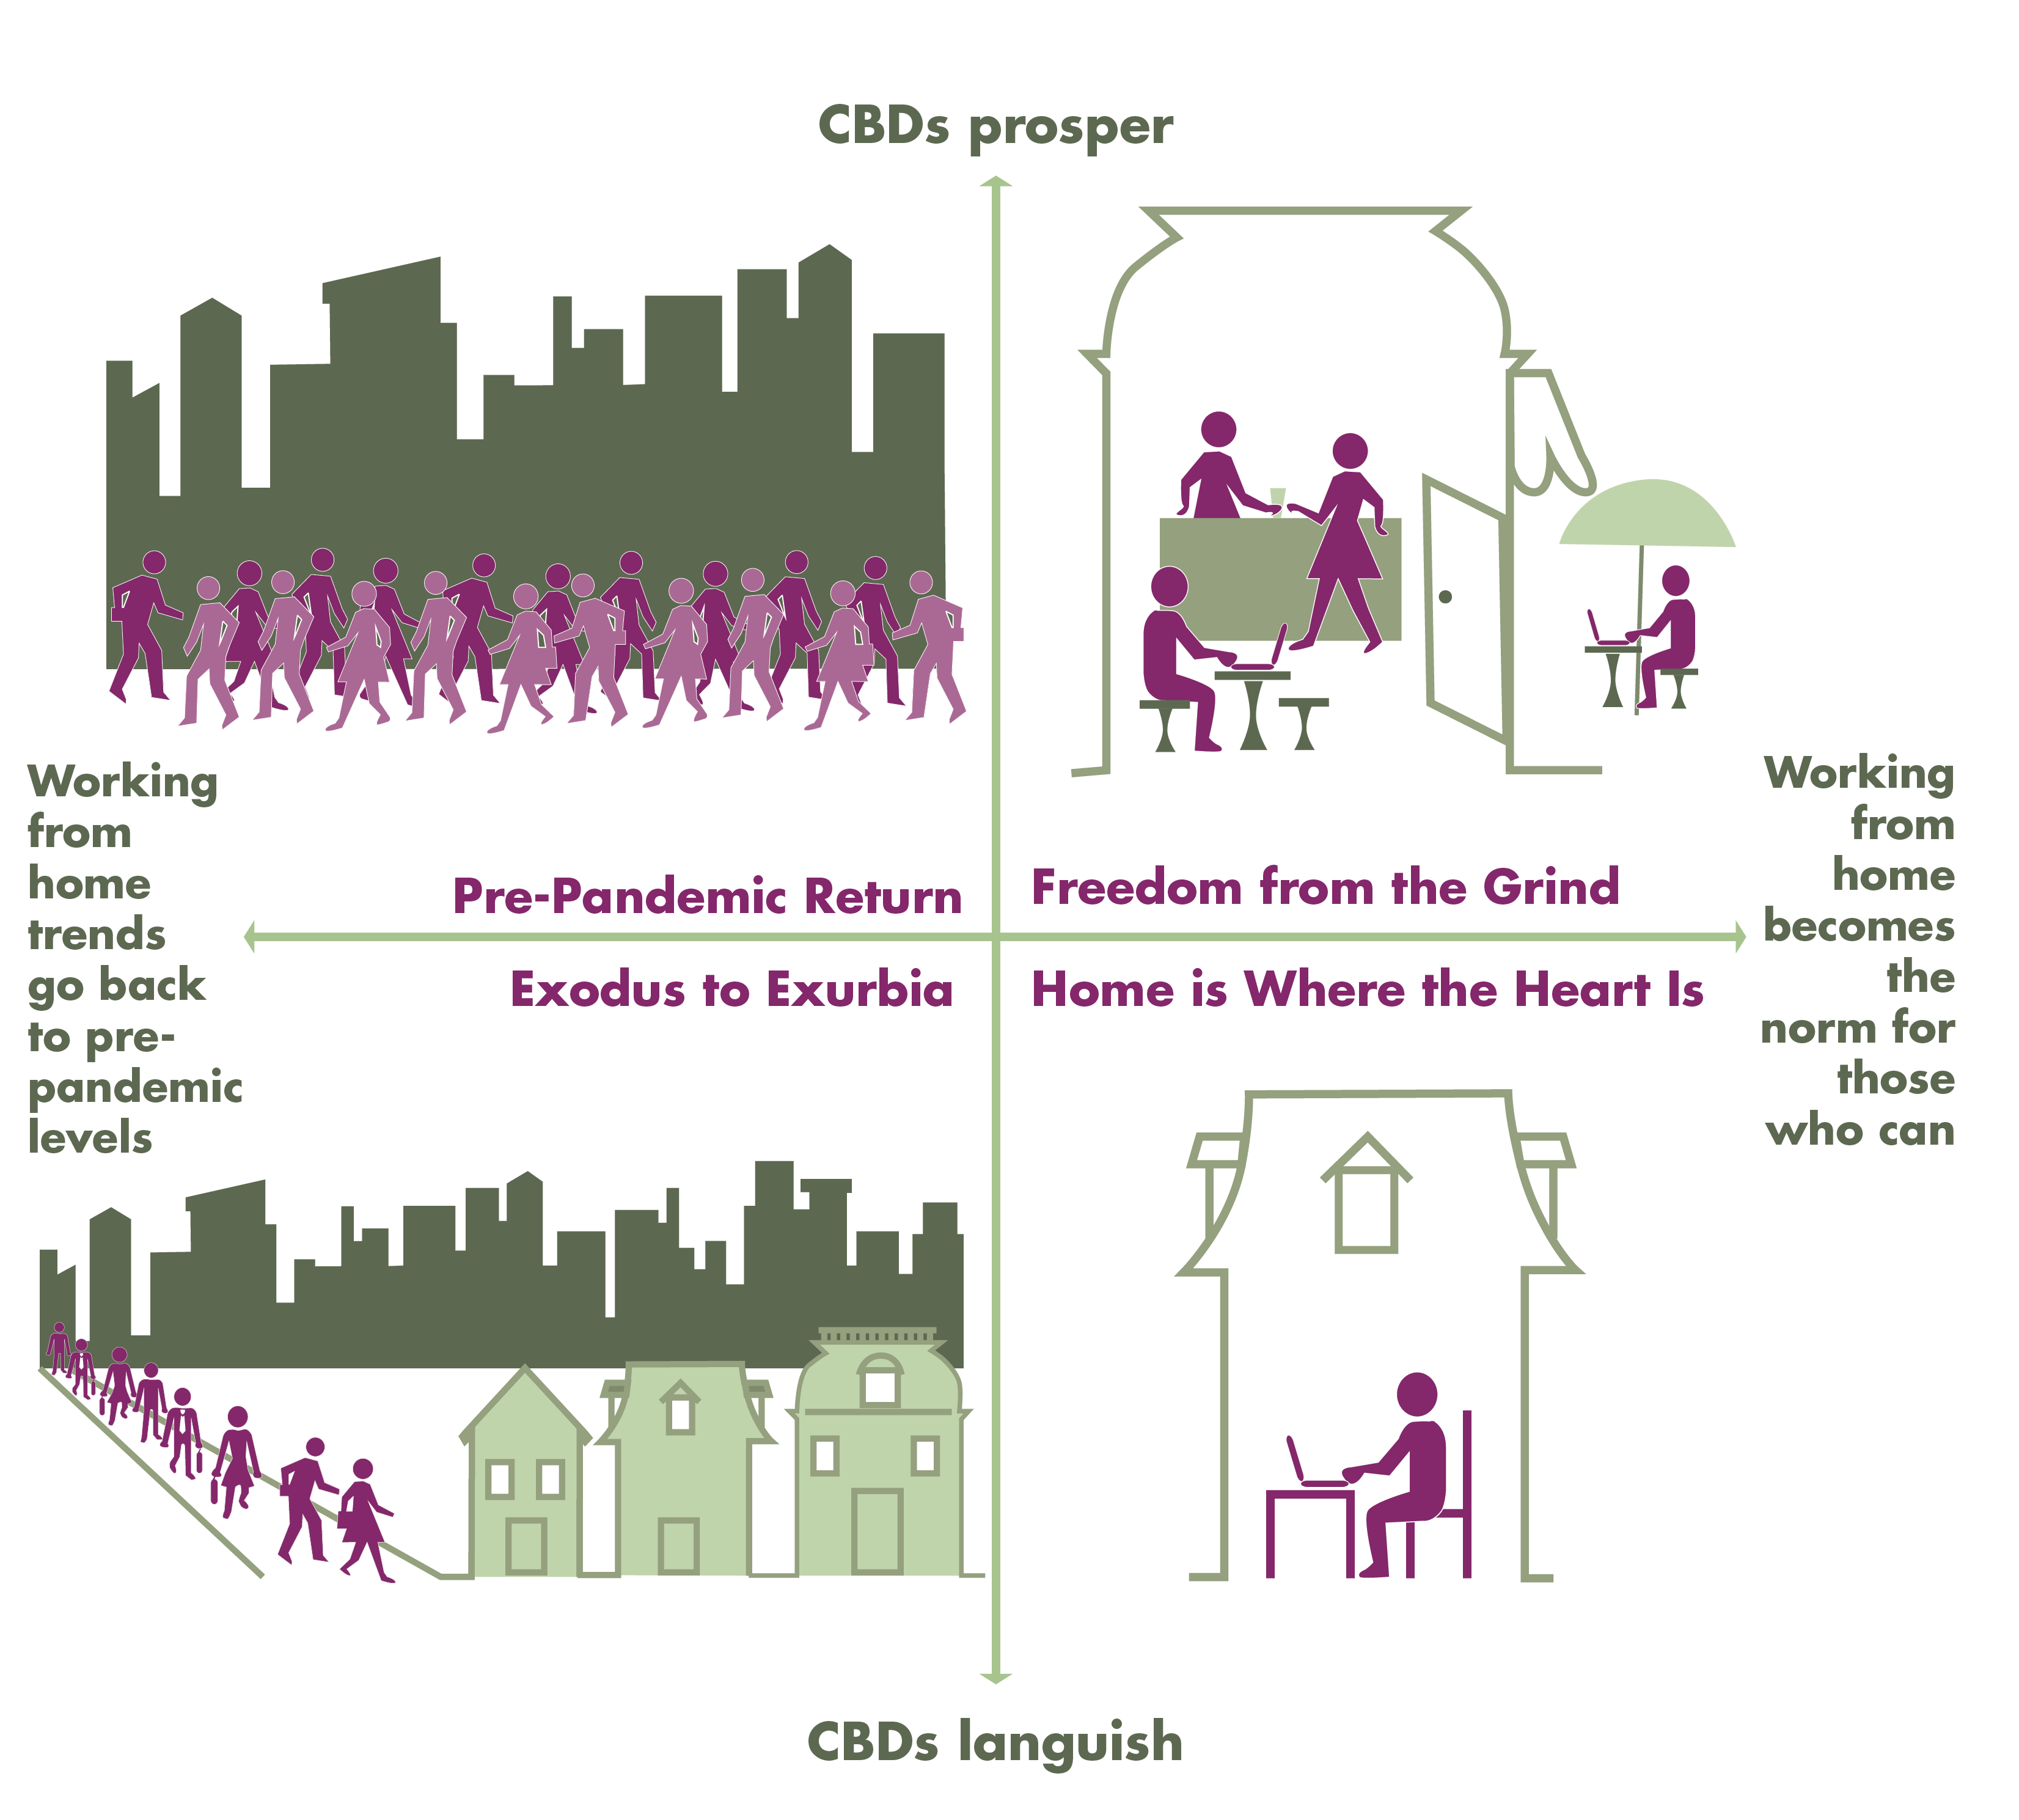 This is an illustration in 4 quadrants: Upper left is Pre-pandemic return showing many people going toward a city, lower left is Exodus to Exurbia showing many people leaving a city, upper right is Freedom from the Grind showing people eating in a Cafe, and lower right is Home is where the heart is showing someone working on a computer in a house.